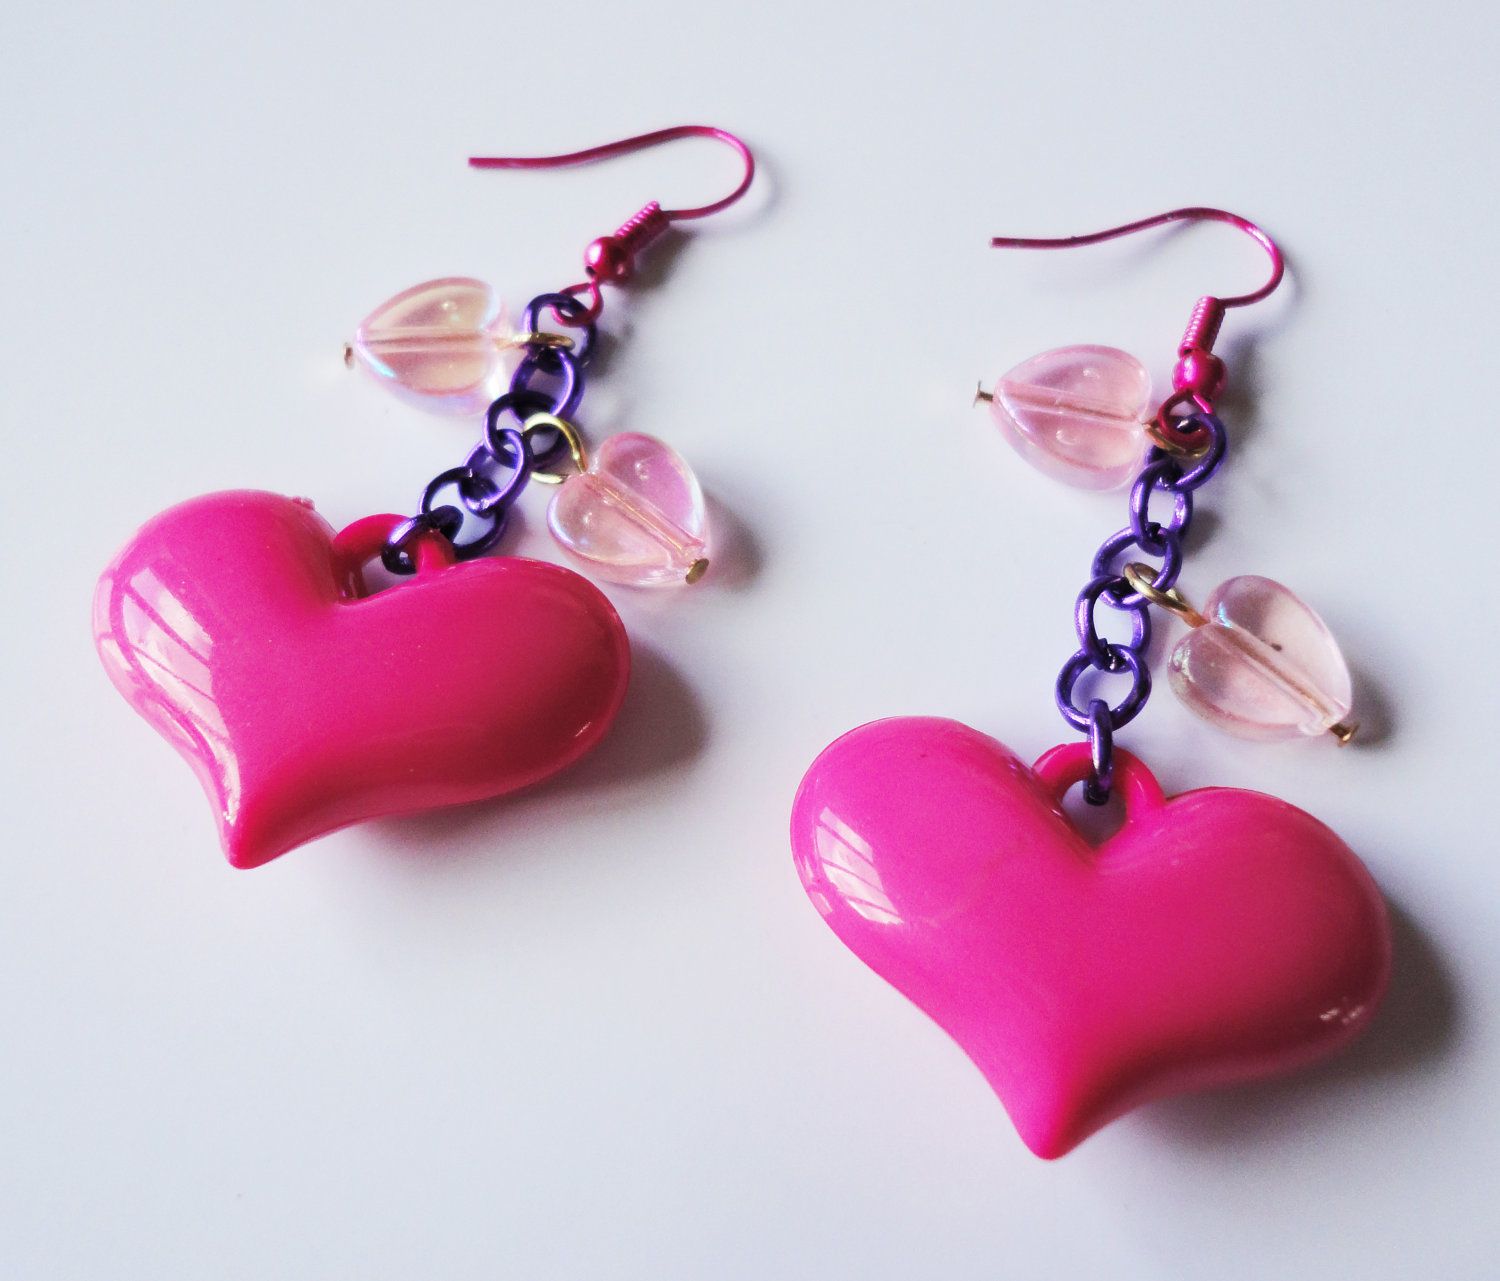 Cute polymer clay pink piggy earrings Wallpaper HD.Now you can